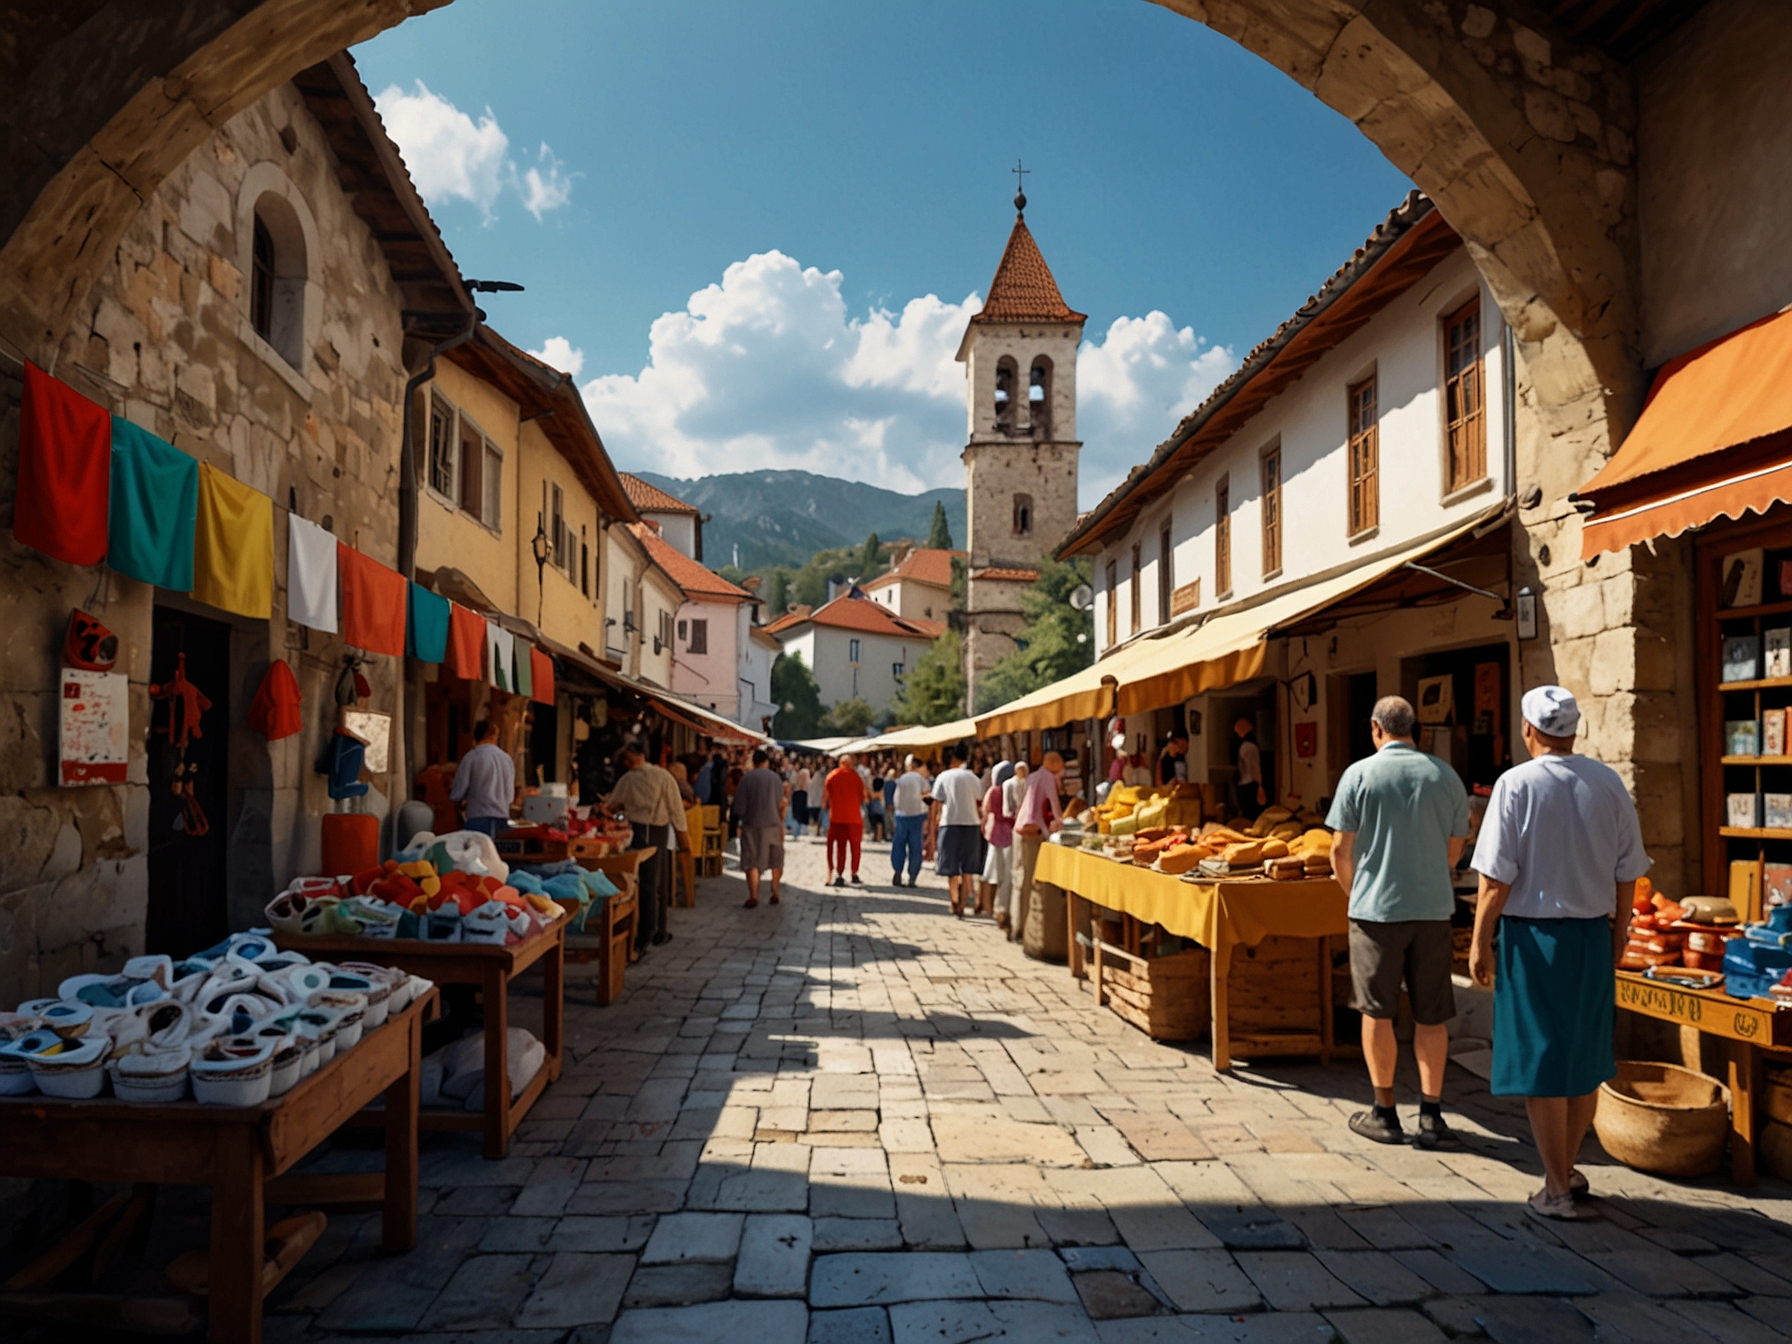 The vibrant Old Bazaar near Stari Most, filled with colorful crafts and souvenirs, attracts visitors eager to experience the traditional Bosnian culture and its rich history.